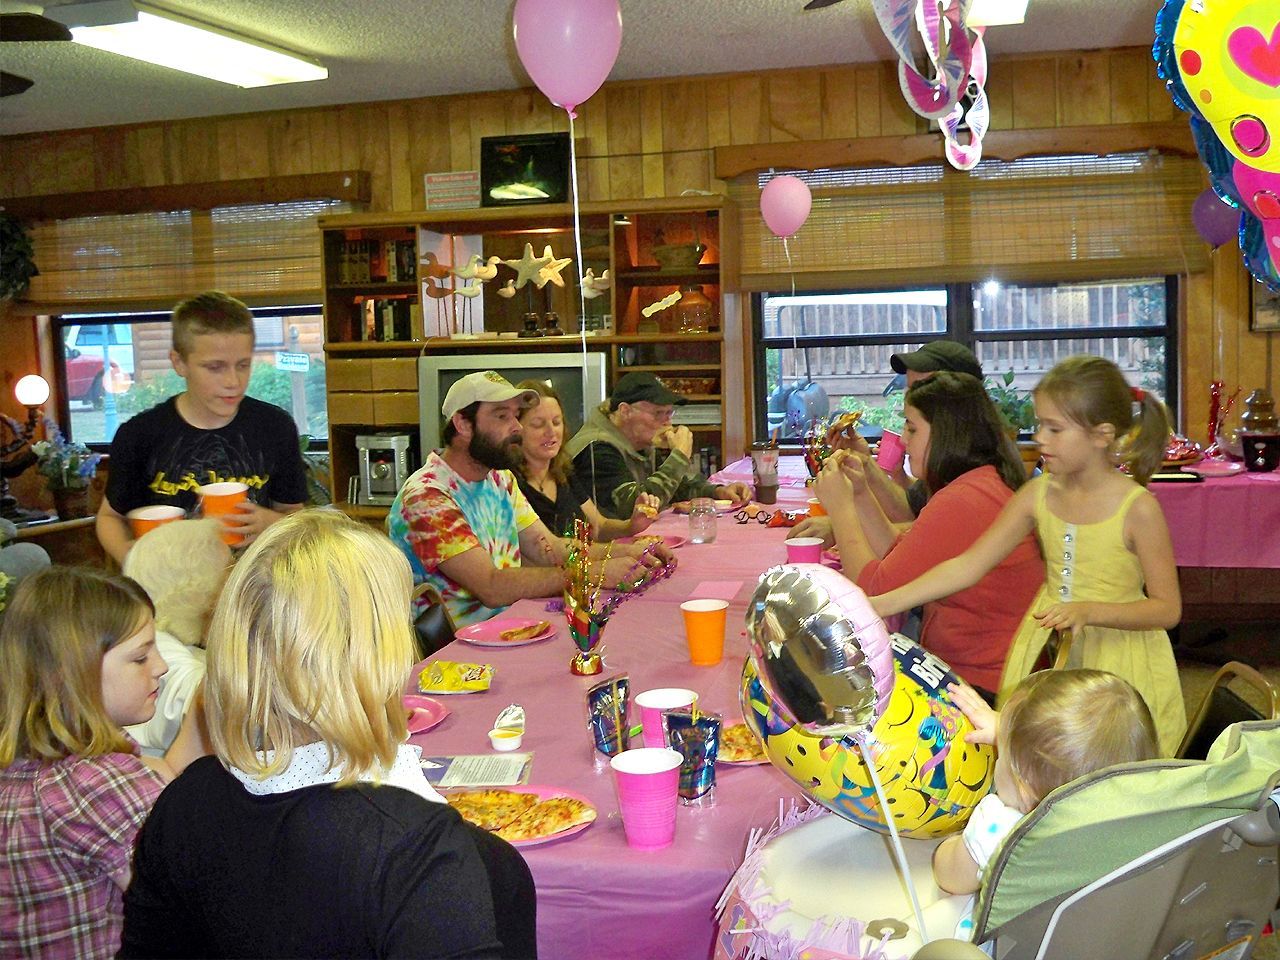 a group of people are sitting at a table with balloons on it